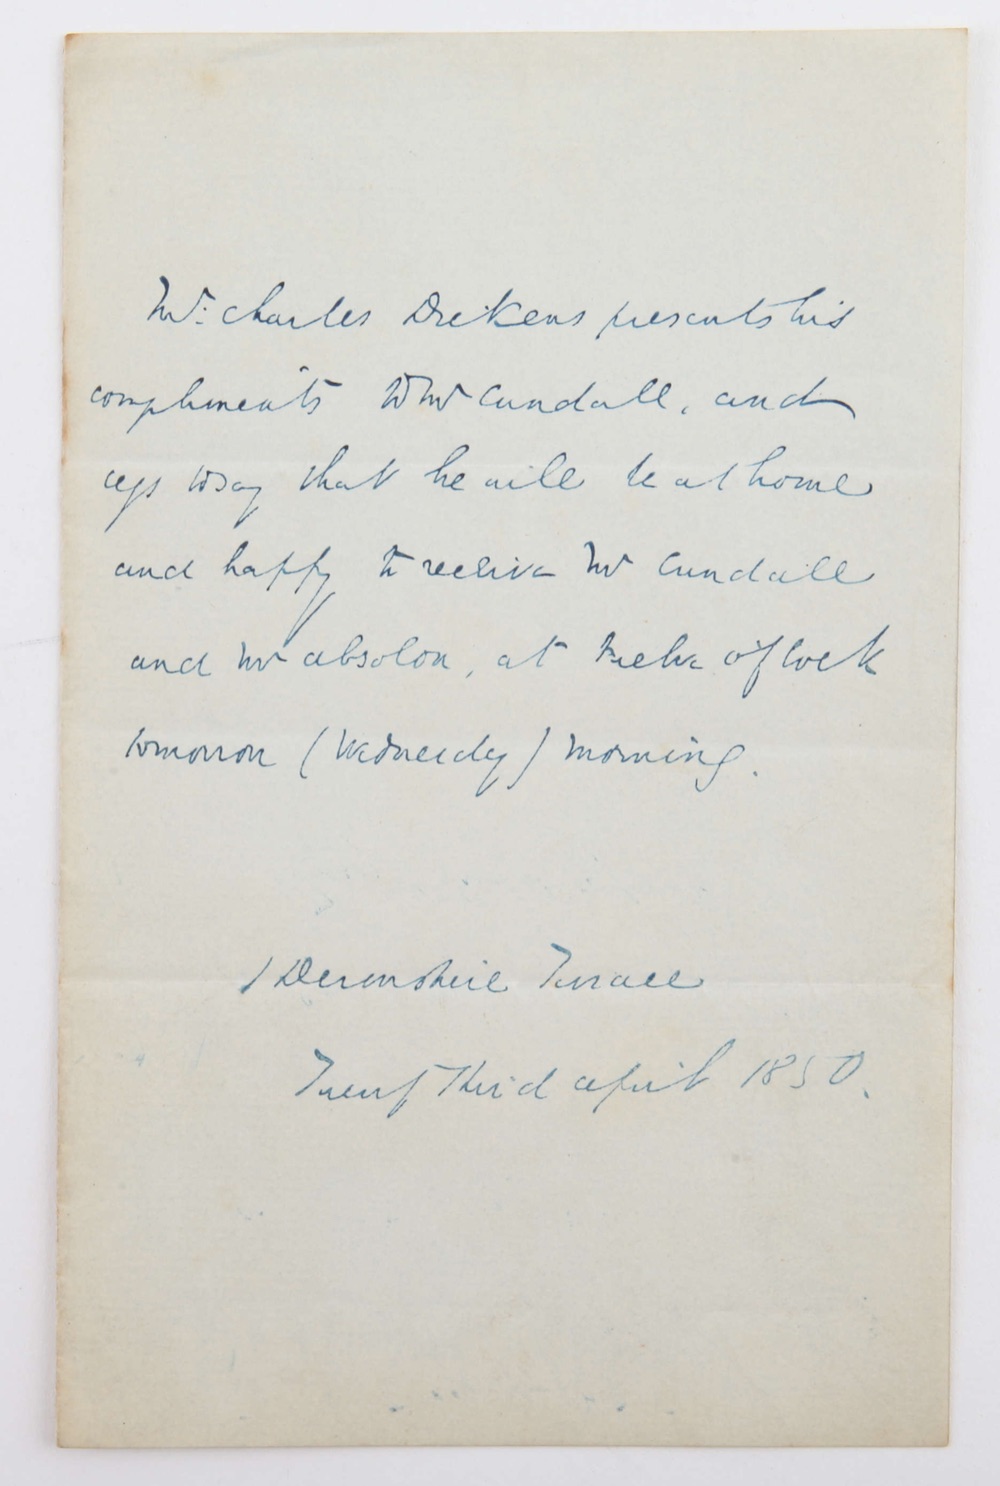 A handwritten letter from Charles Dickens